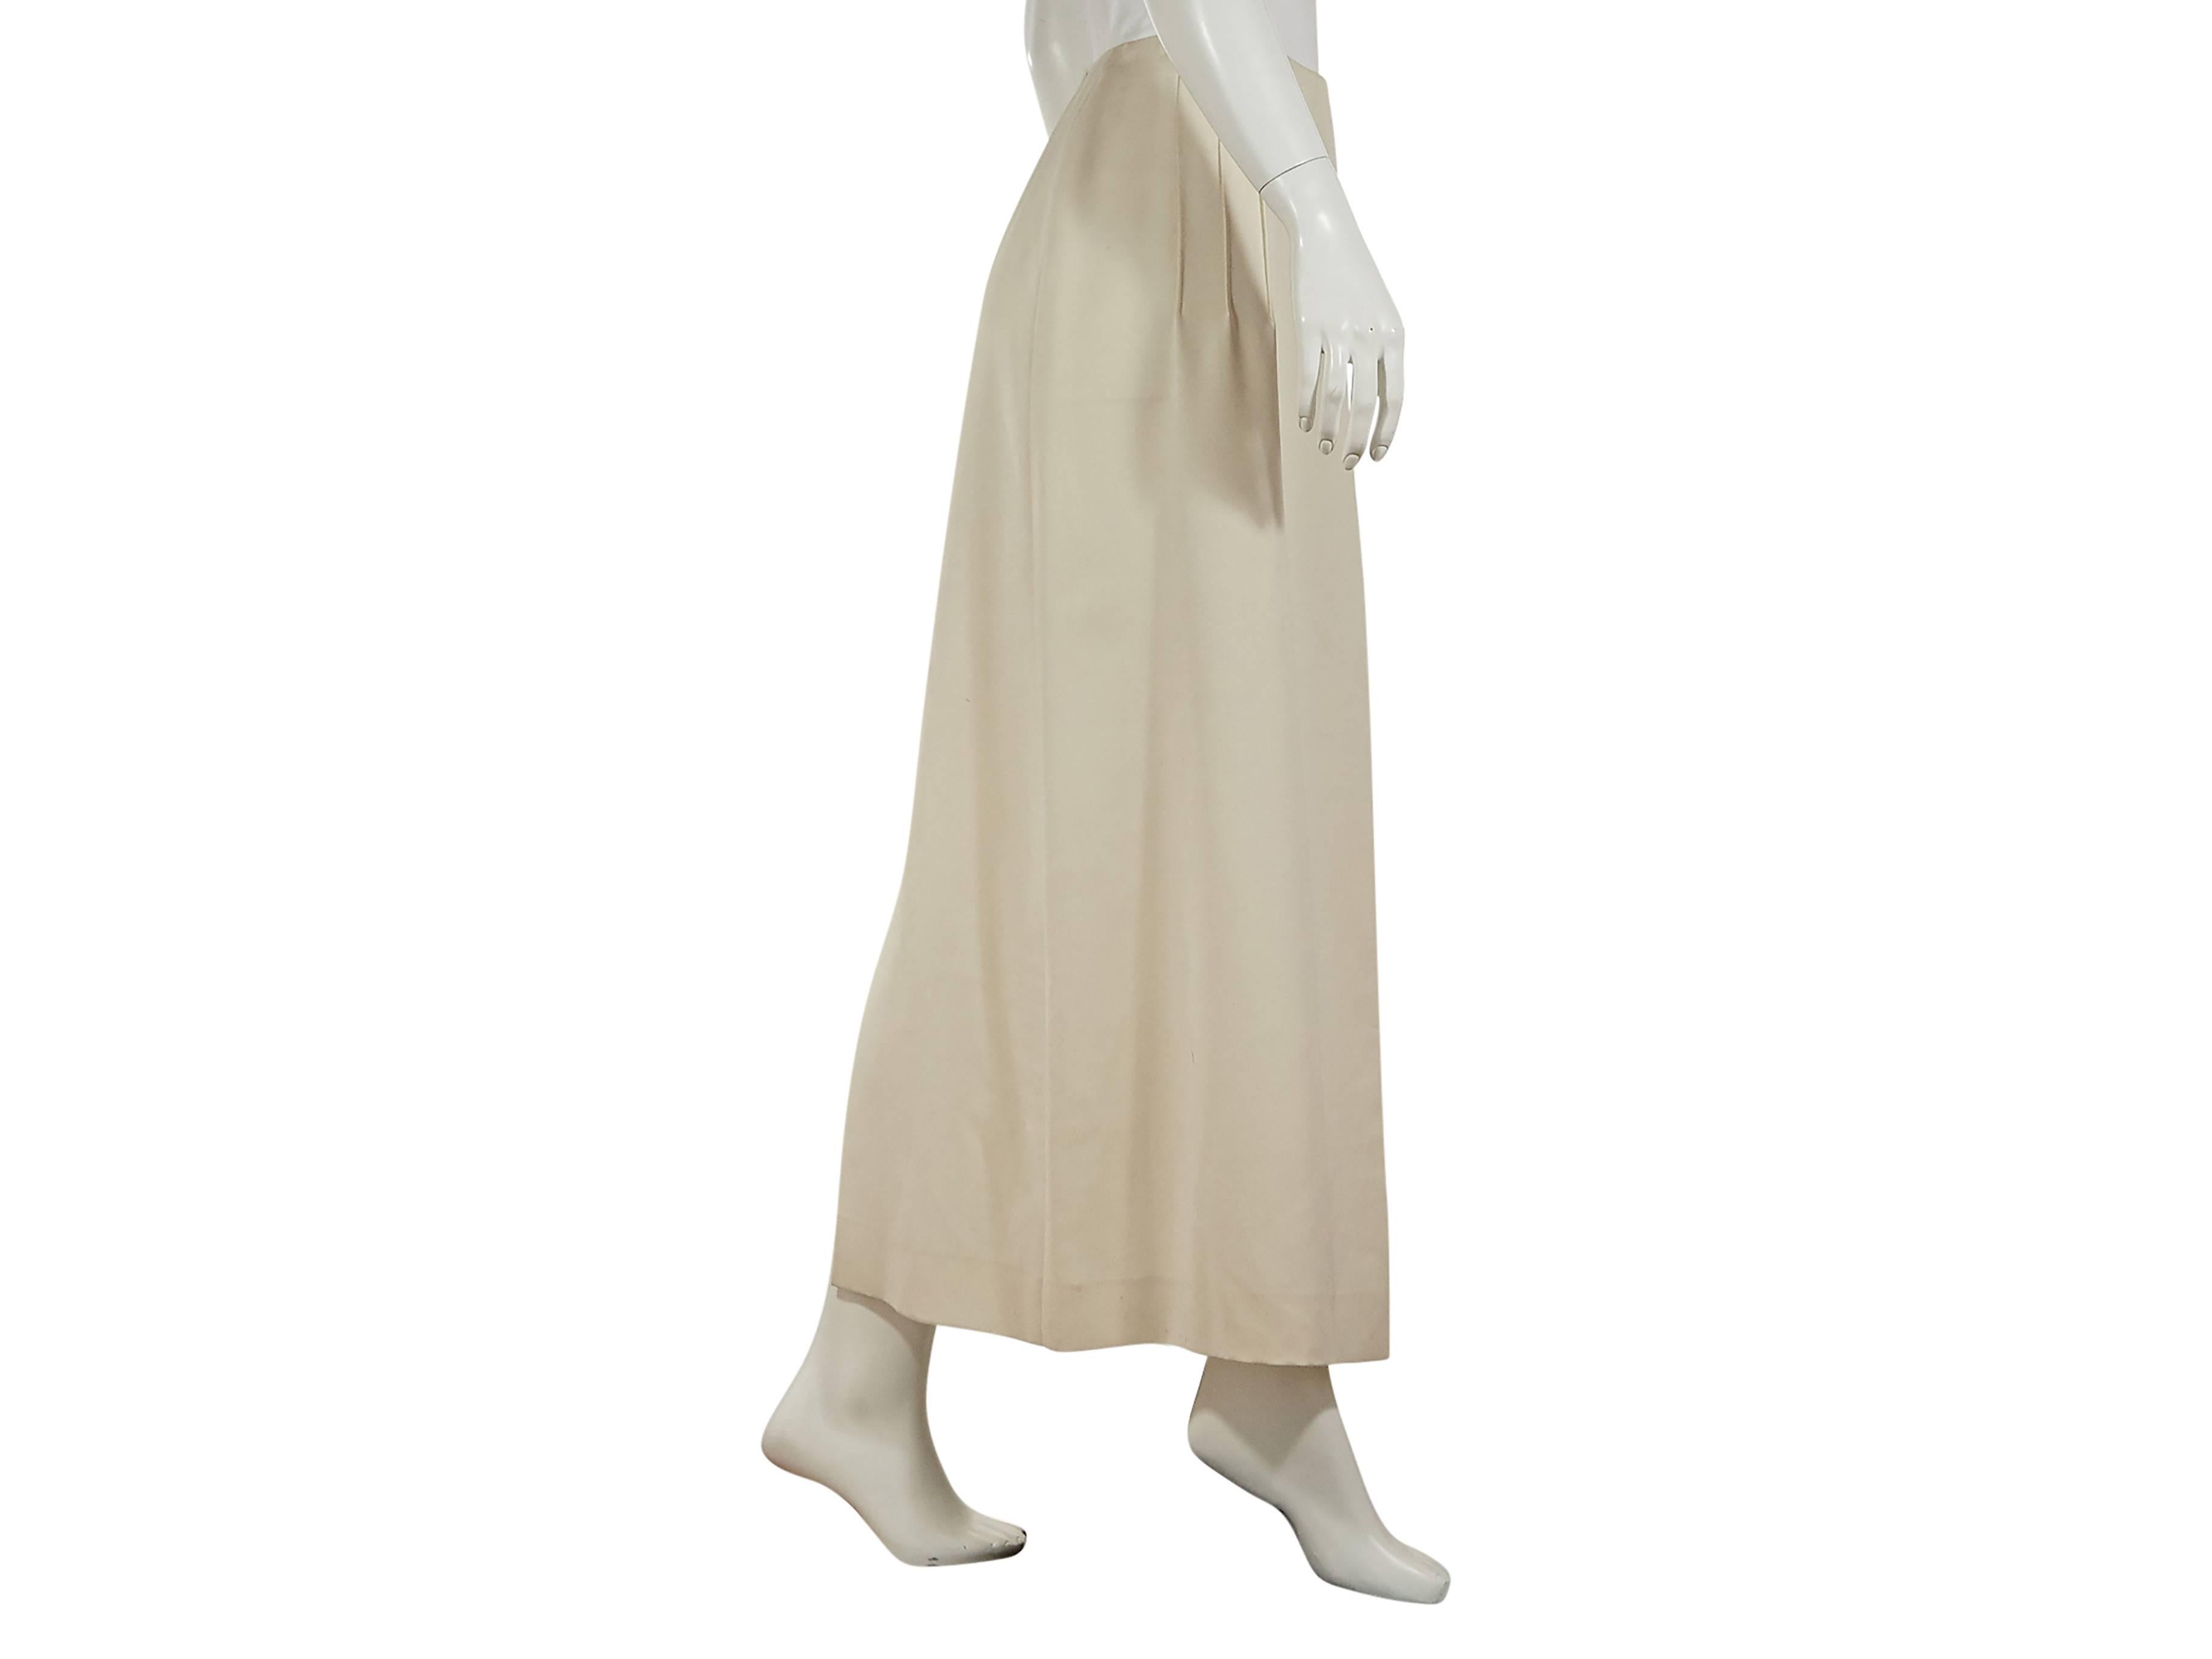 Ivory maxi skirt by Chanel.  Diagonally front and back pleats.  Side concealed zip closure.  Back hem vent. 